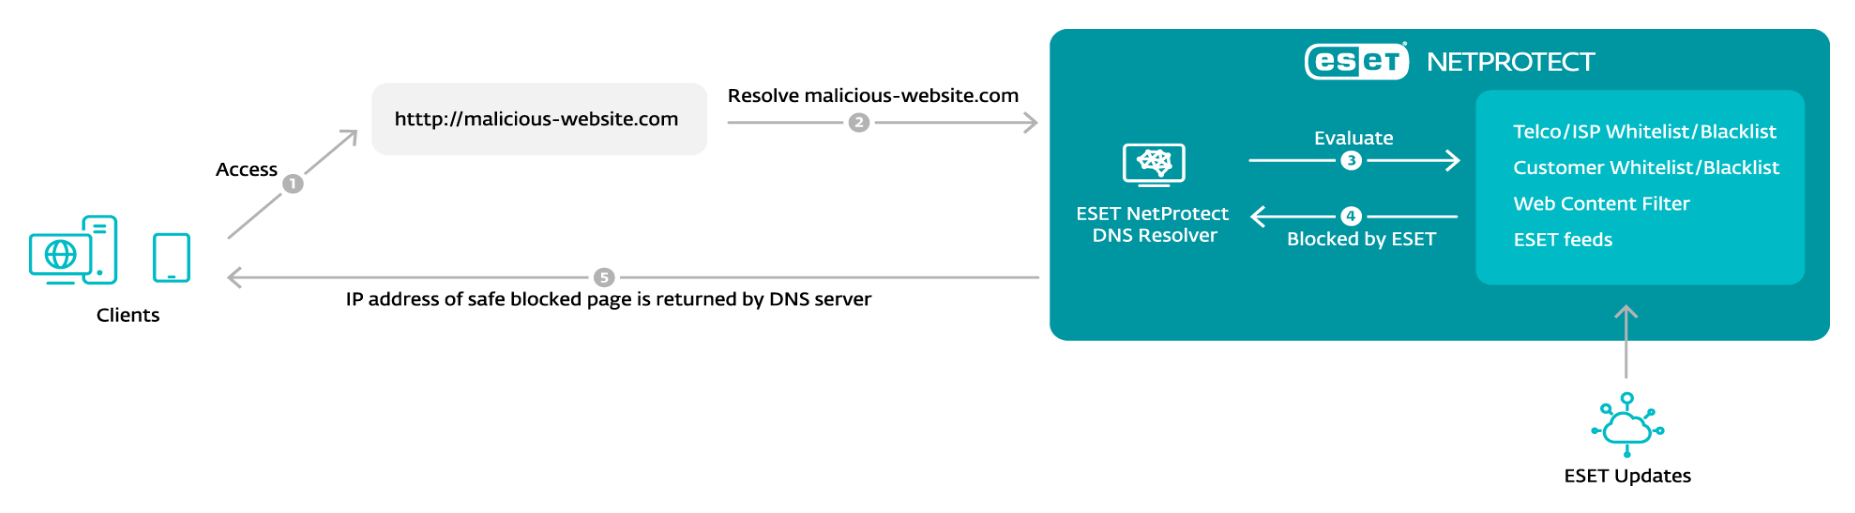 Delivering trust with DNS security